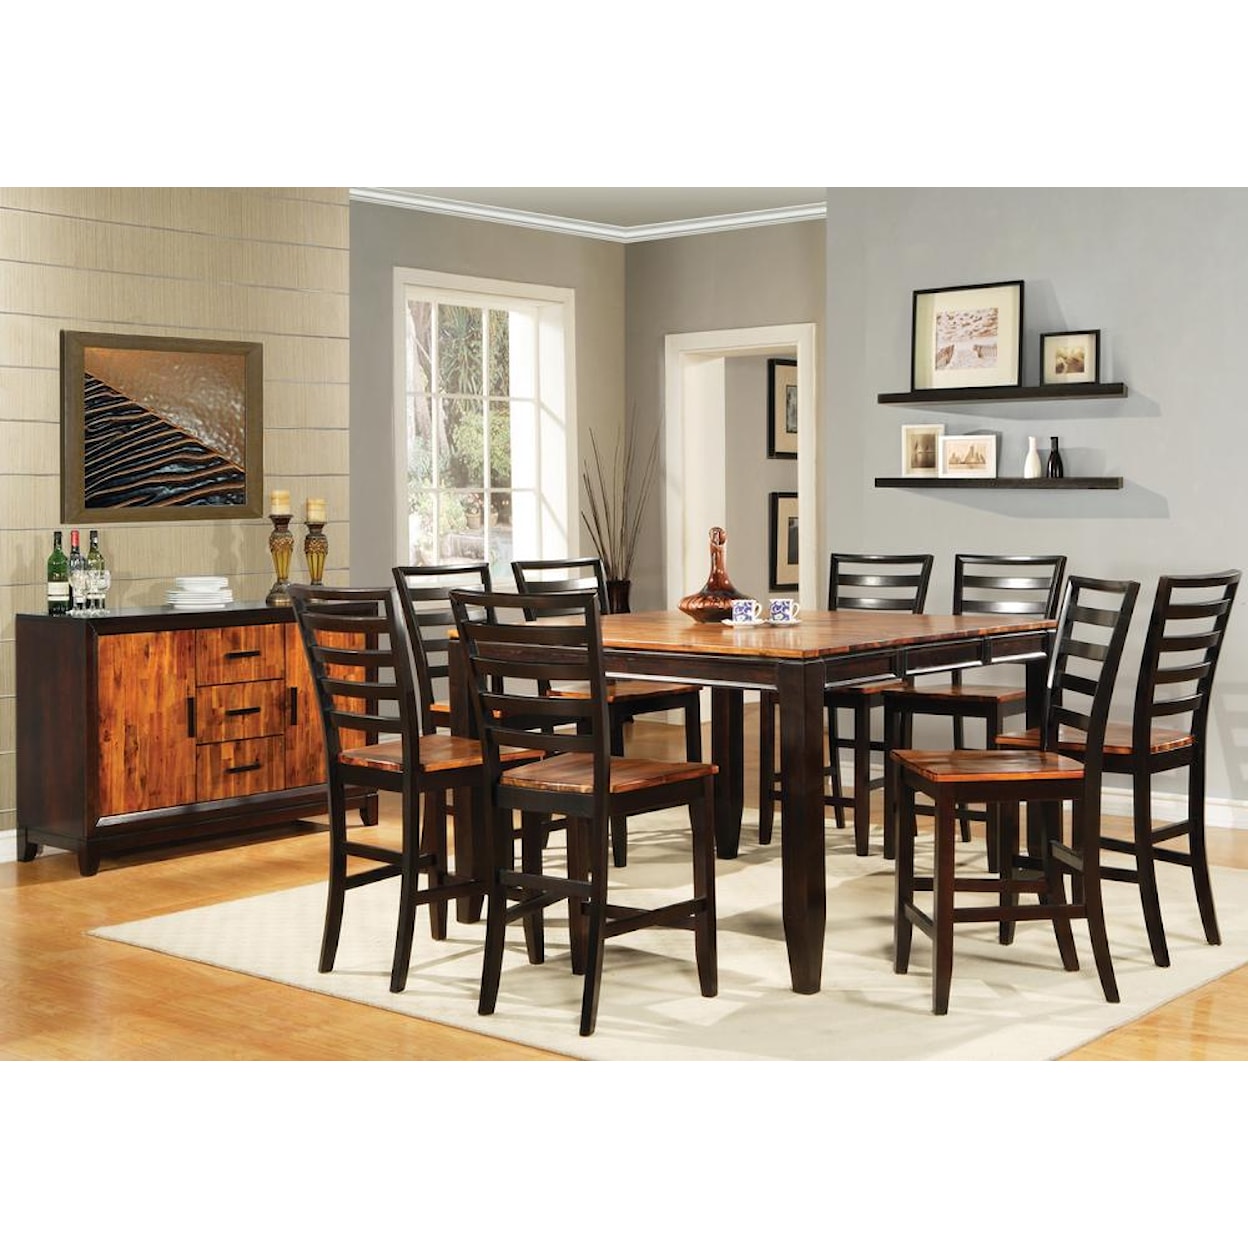 Steve Silver Abaco Formal Dining Room Group